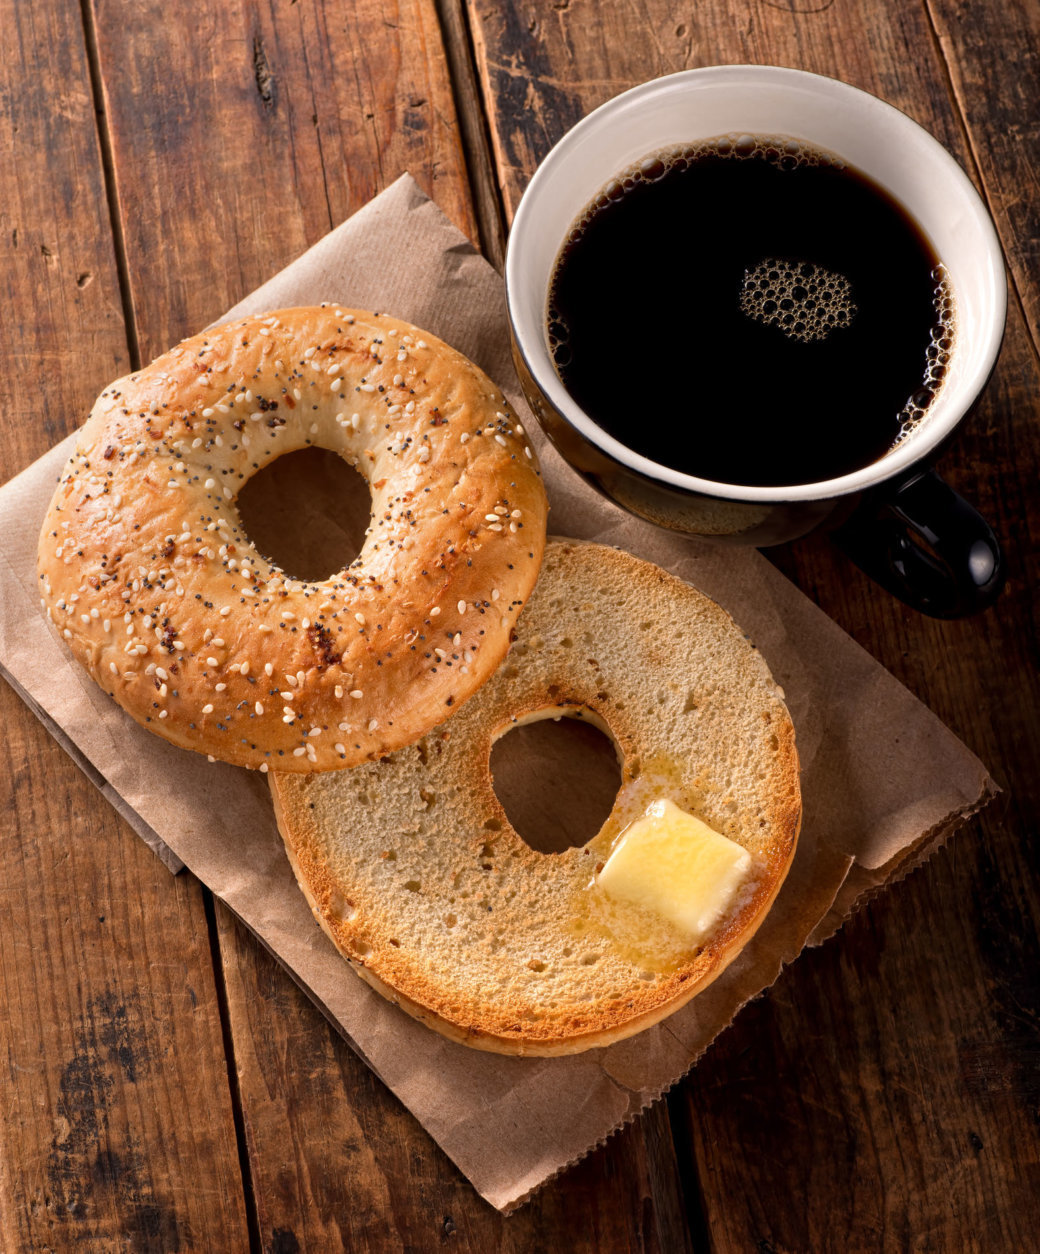 At Einstein Bros. Bagels, customers can get a free cup of brewed coffee with any food purchase. (Thinkstock)